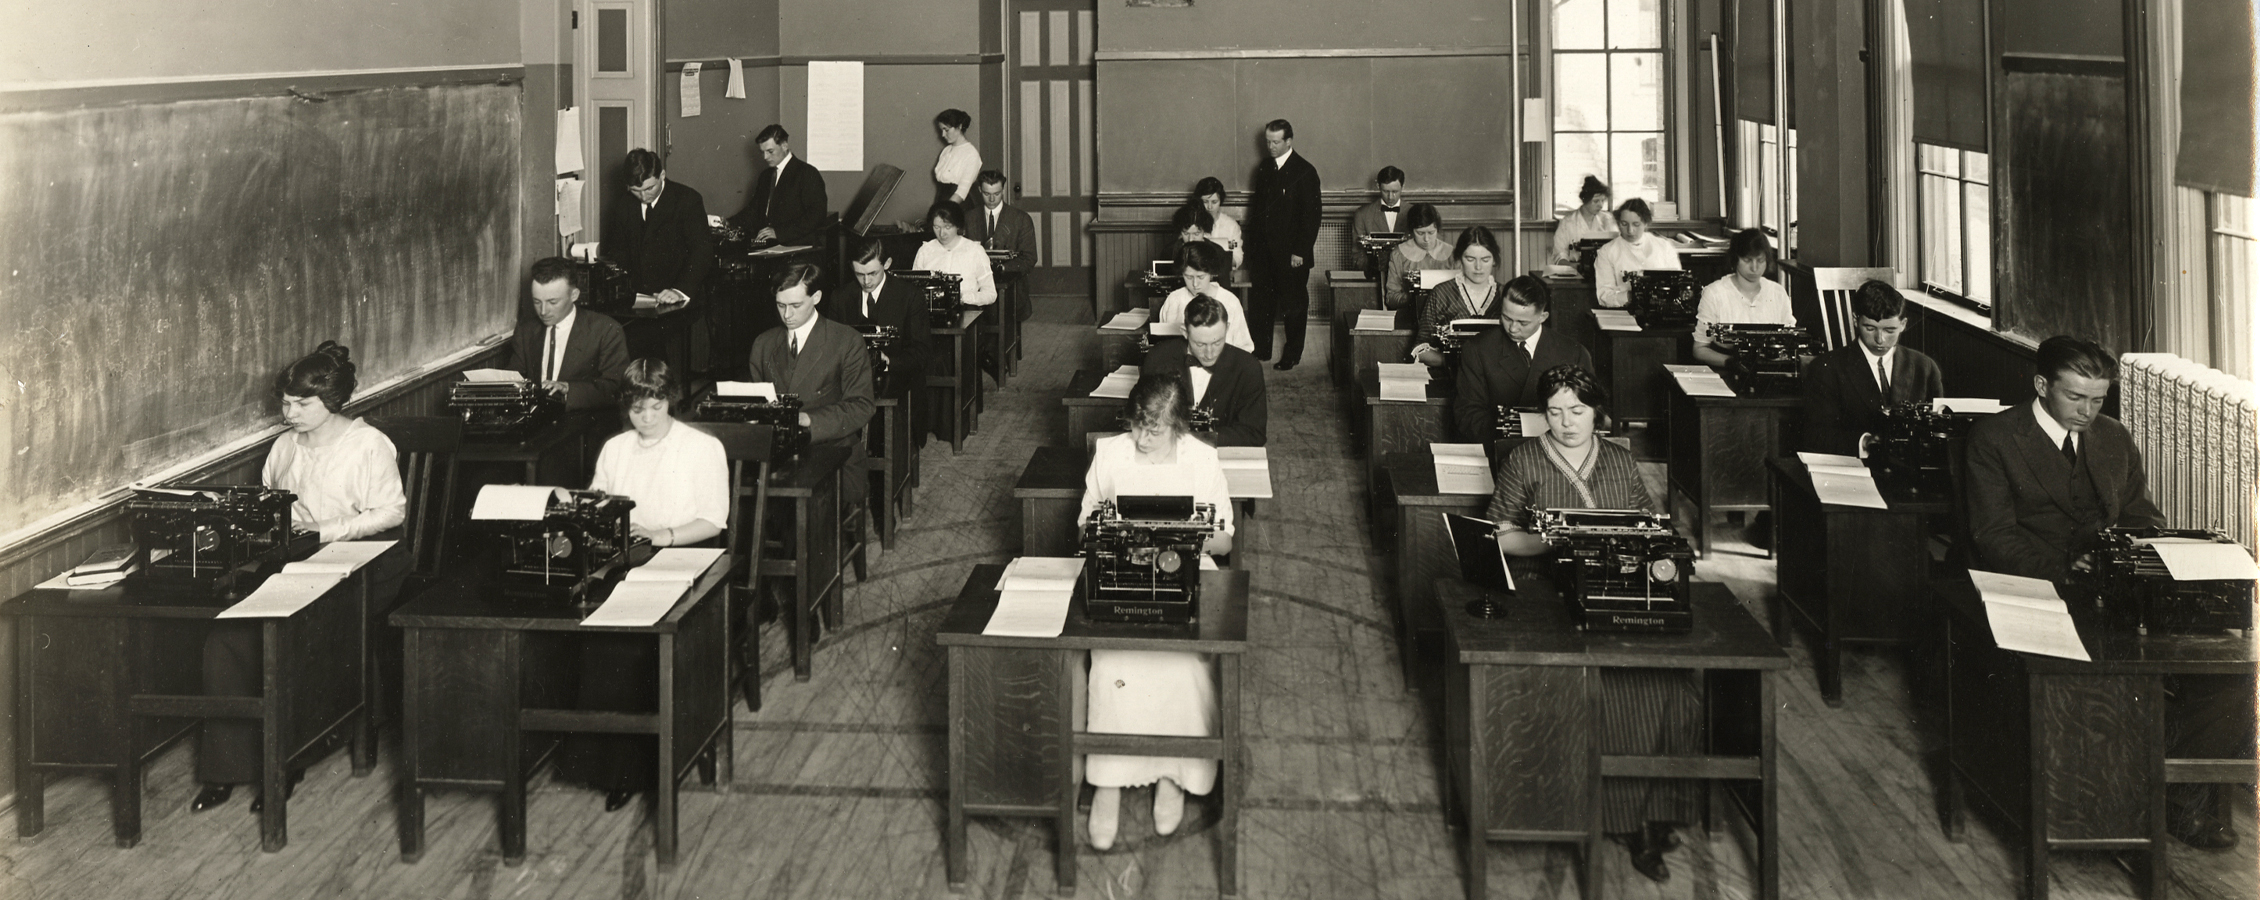 An old photo shows business students sitting at desks with typewriters in the earliest days of the business school.